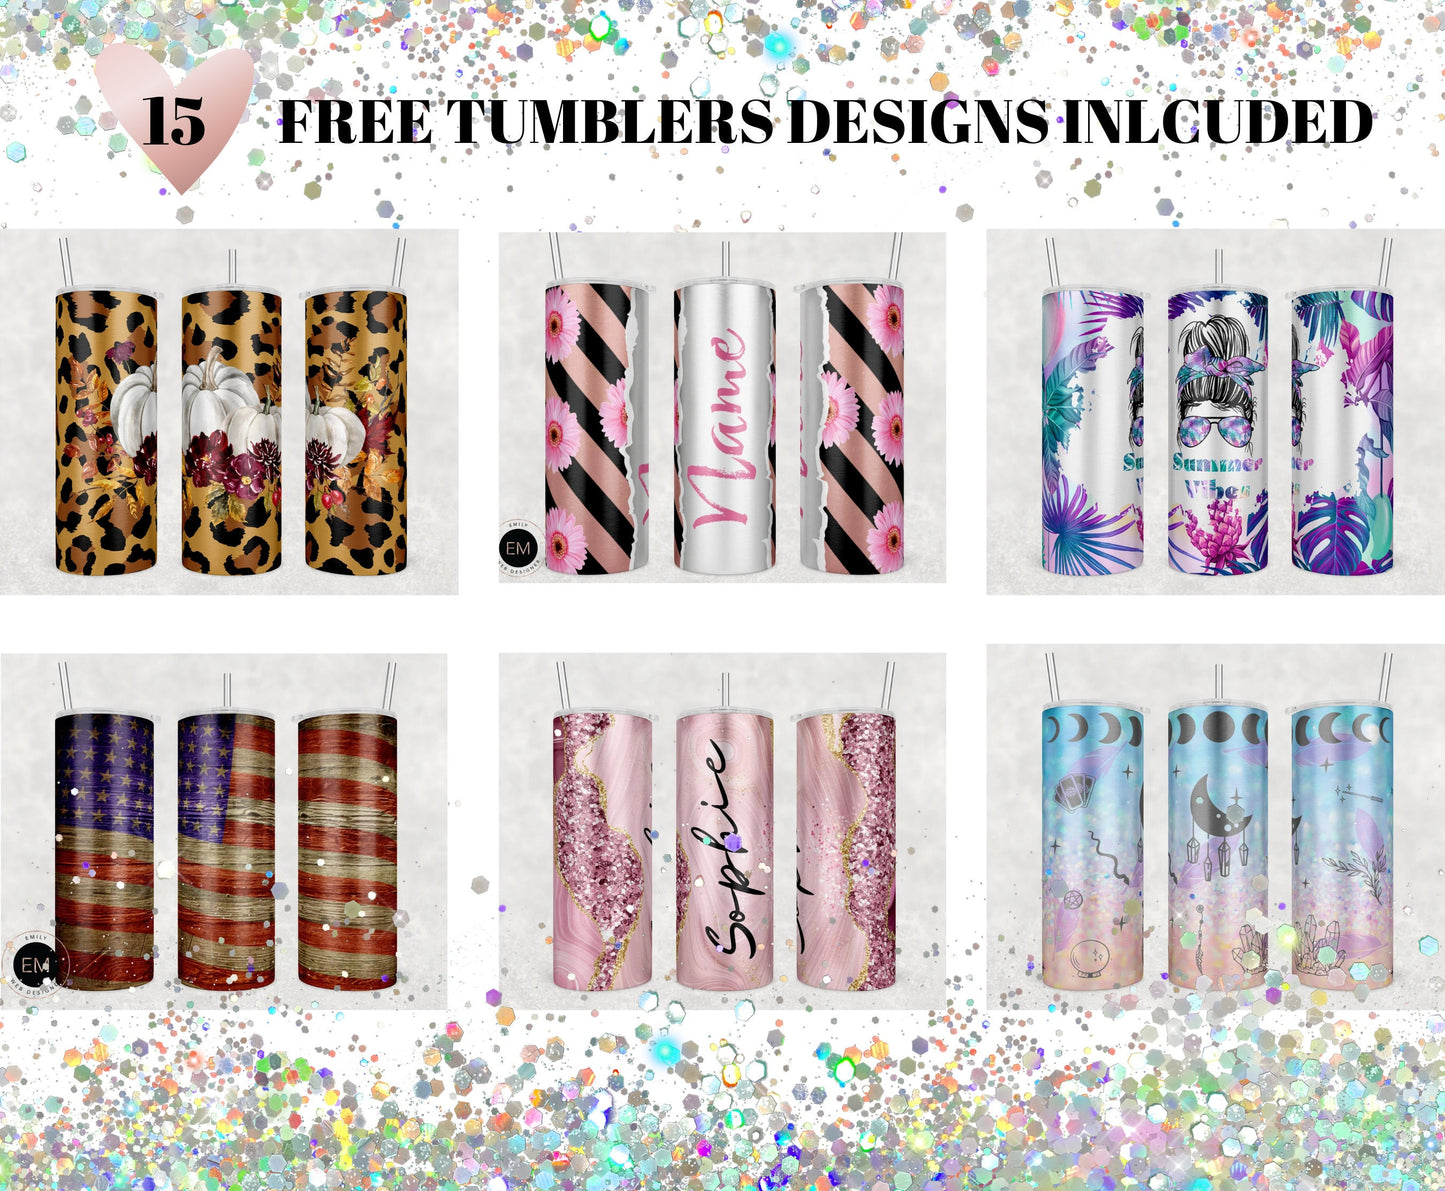 Bride tumbler wrap PNG for 20oz skinny tumbler- Add Your Own Text sublimation designs, wedding tumbler, bachelorette party